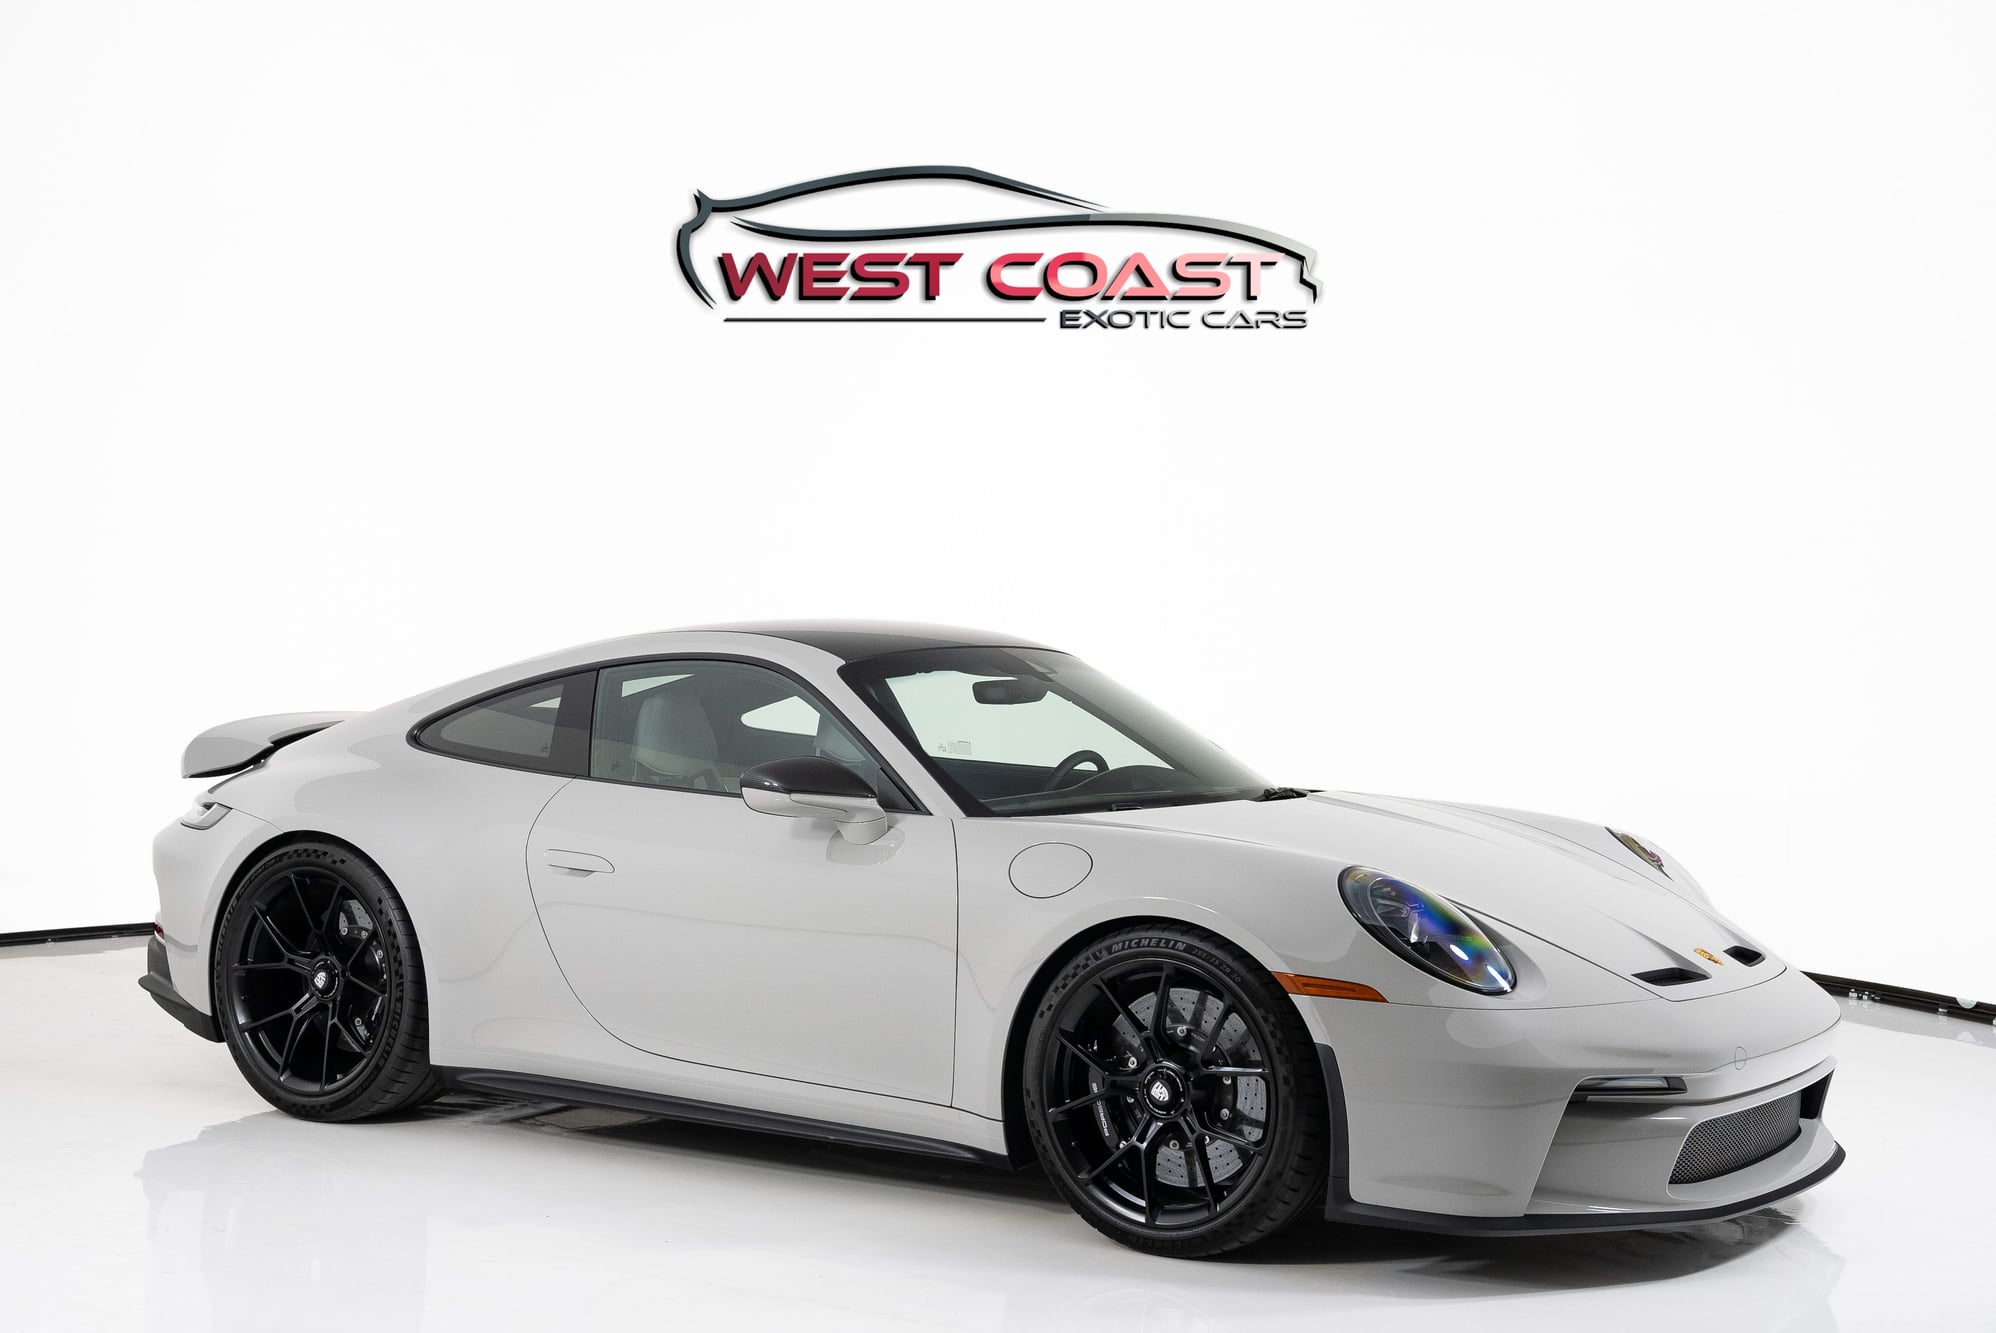 2023 Porsche 911 - CHALK 992 GT3 TOURING - Used - VIN WP0AC2A97PS270247 - 45 Miles - 6 cyl - 2WD - Manual - Coupe - Gray - Murrieta, CA 92562, United States